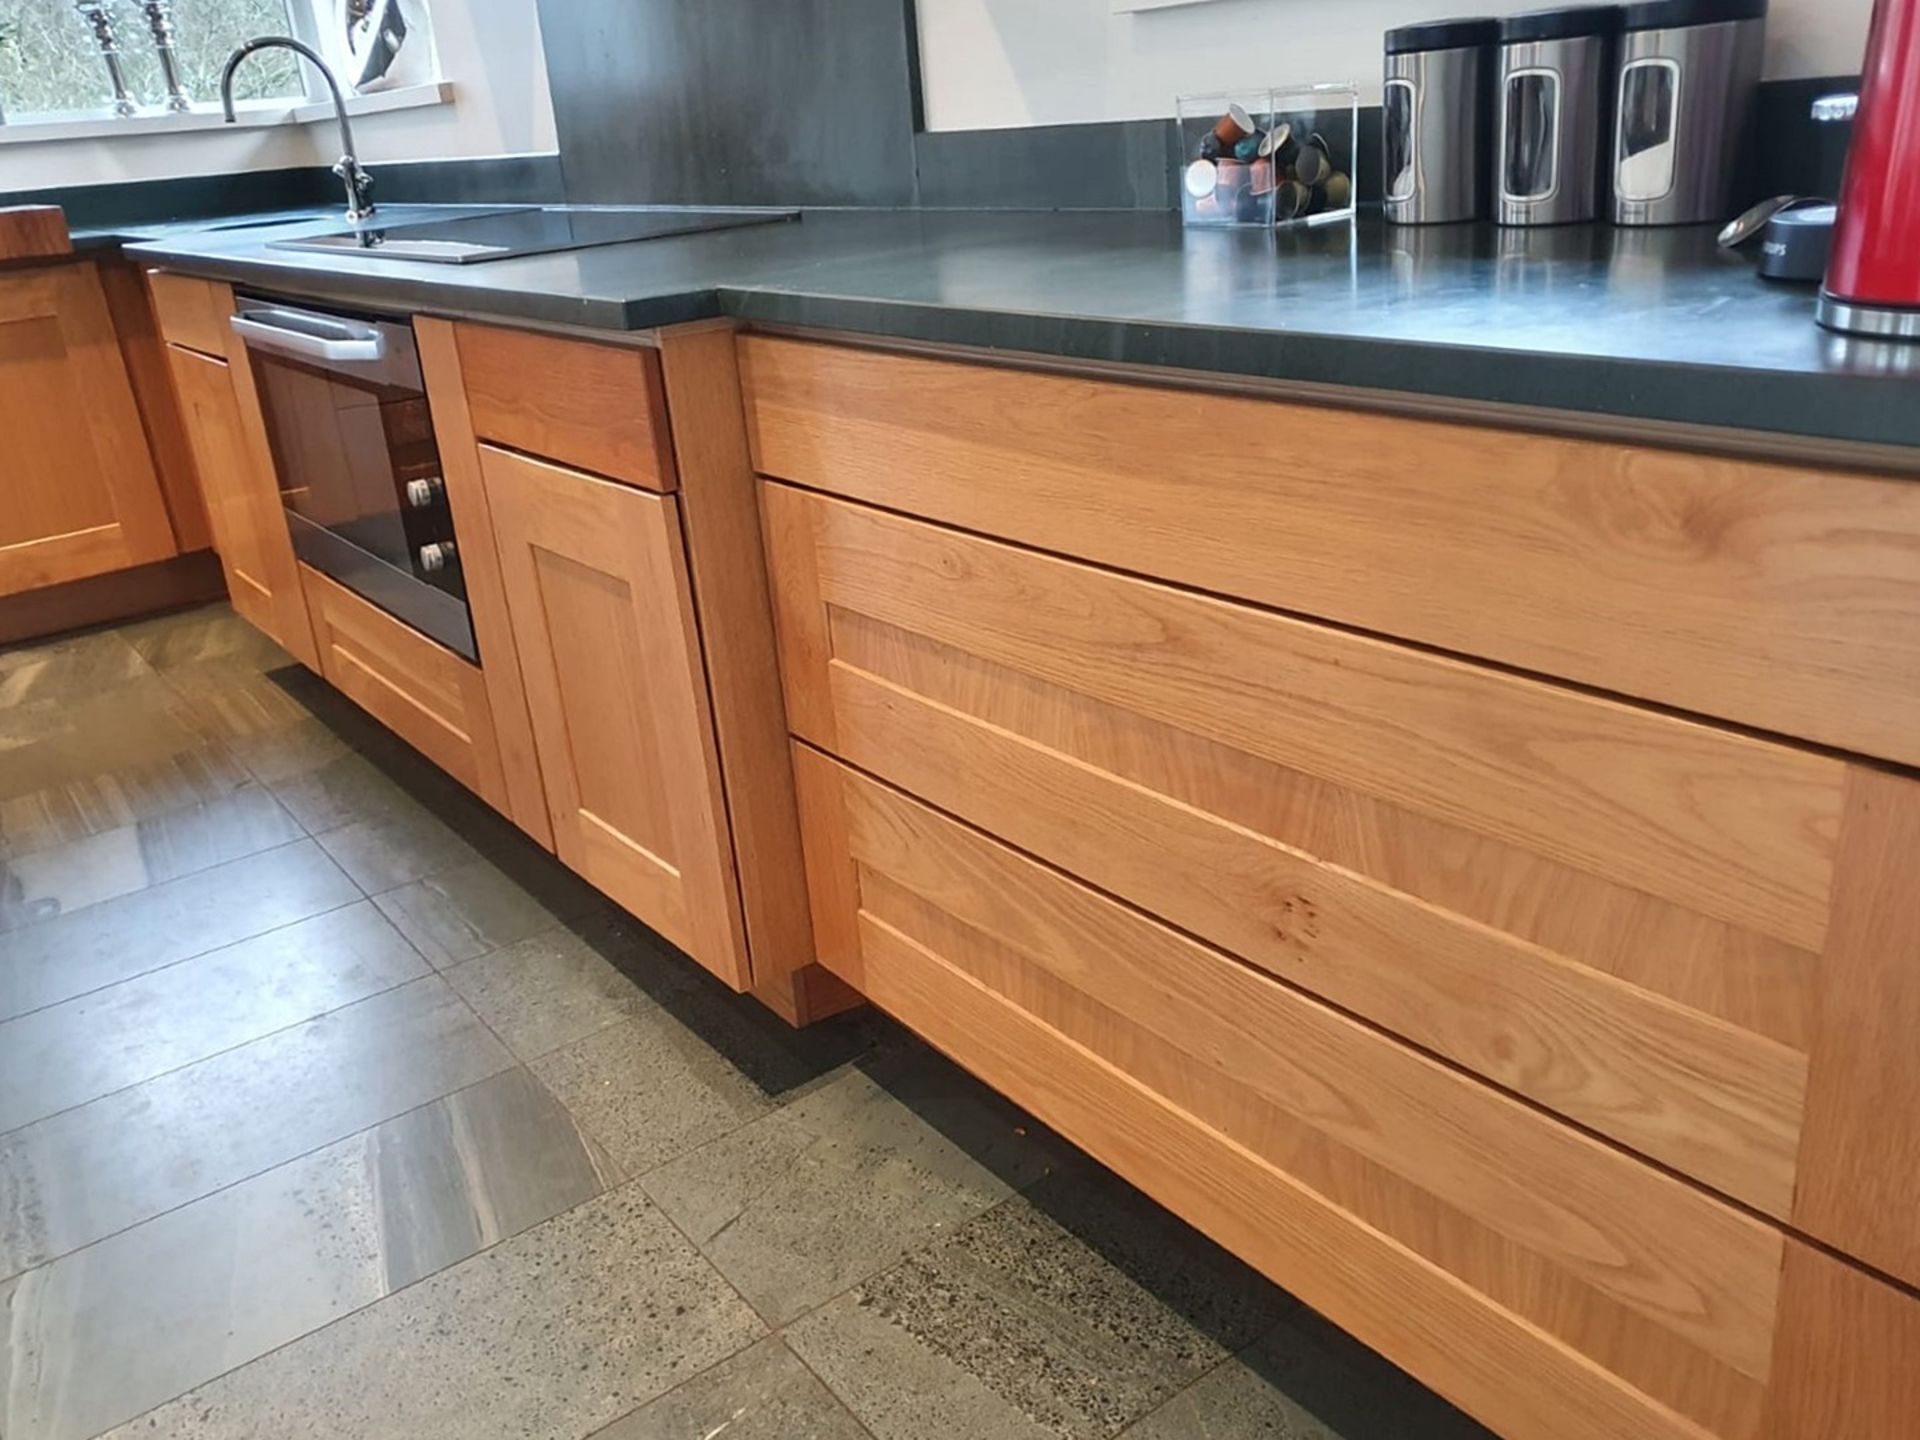 1 x Solid Oak Fitted Kitchen With Intergrated Miele Appliancess - CL487 - Location: Wigan *NO VAT* - Image 30 of 82